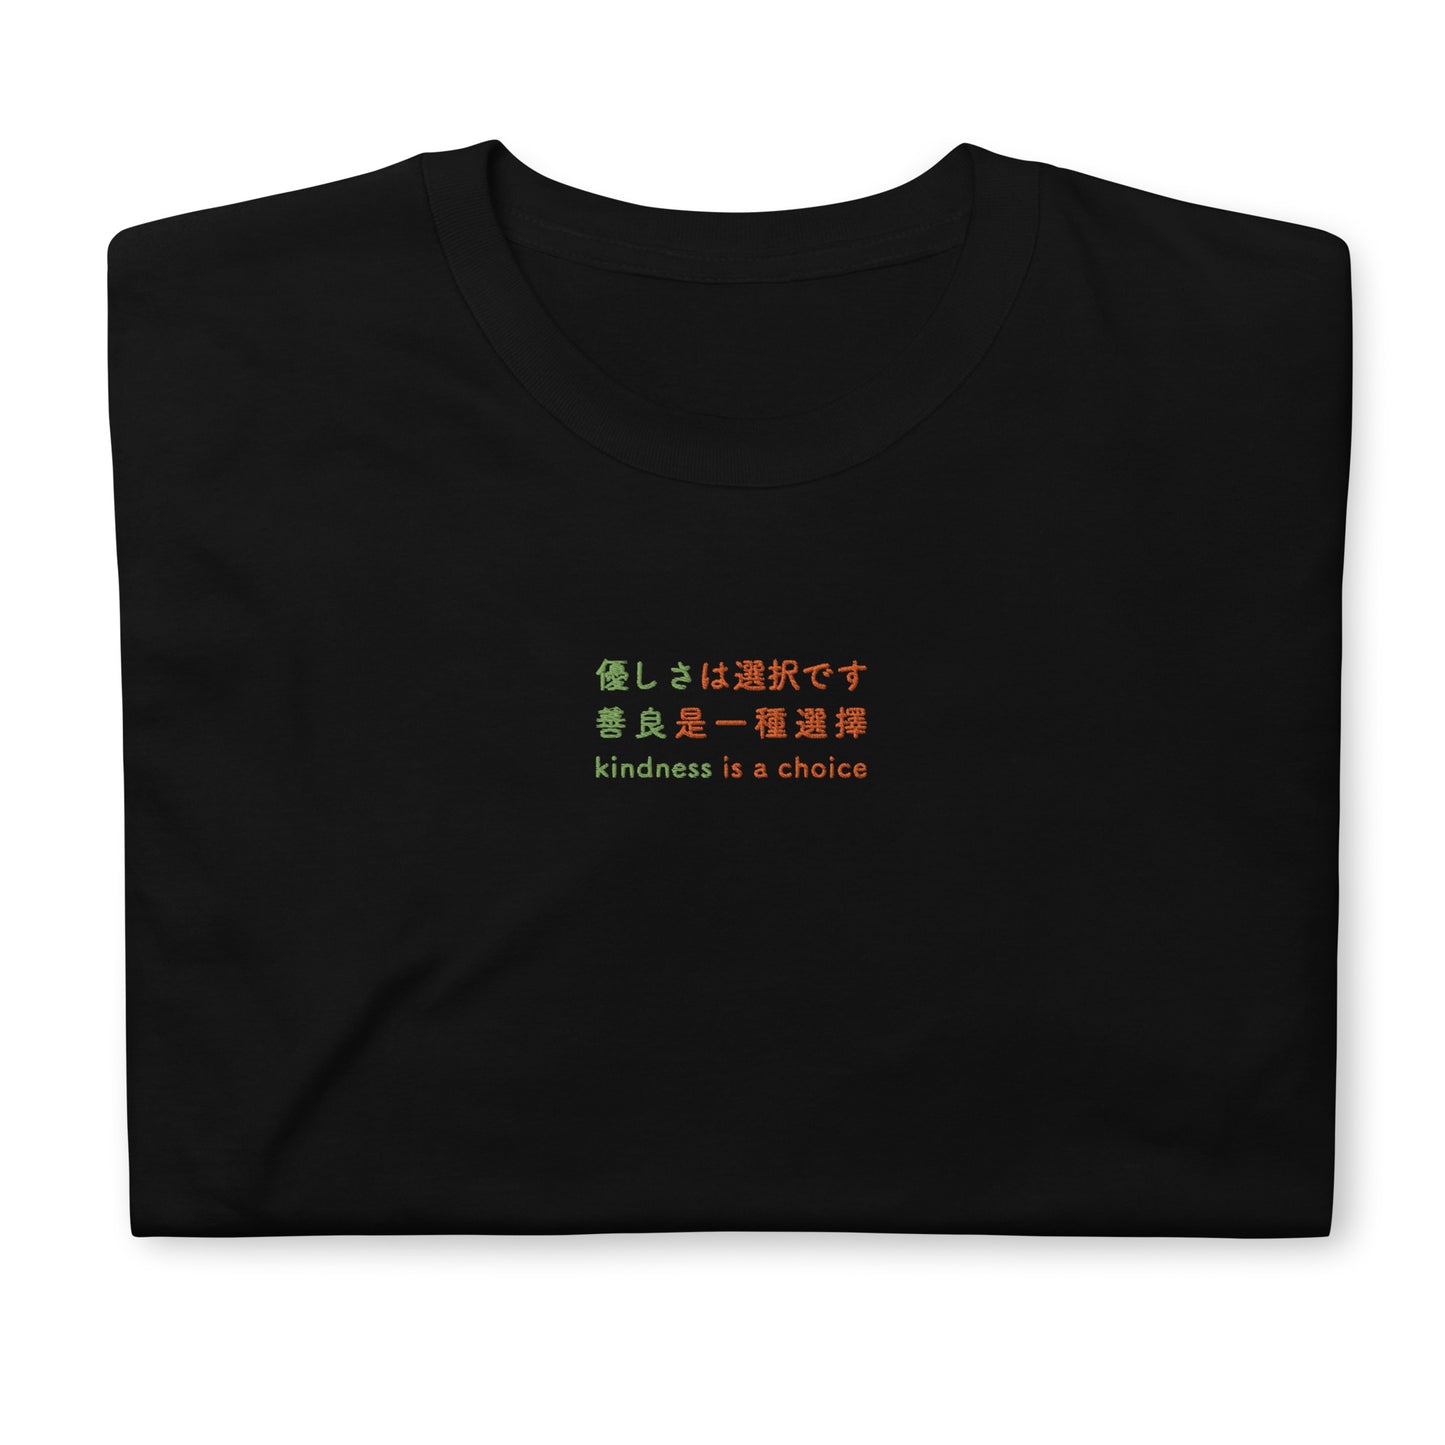 Black High Quality Tee - Front Design with an Green, Orange Embroidery "Kindness is a Choice" in Japanese,Chinese and English